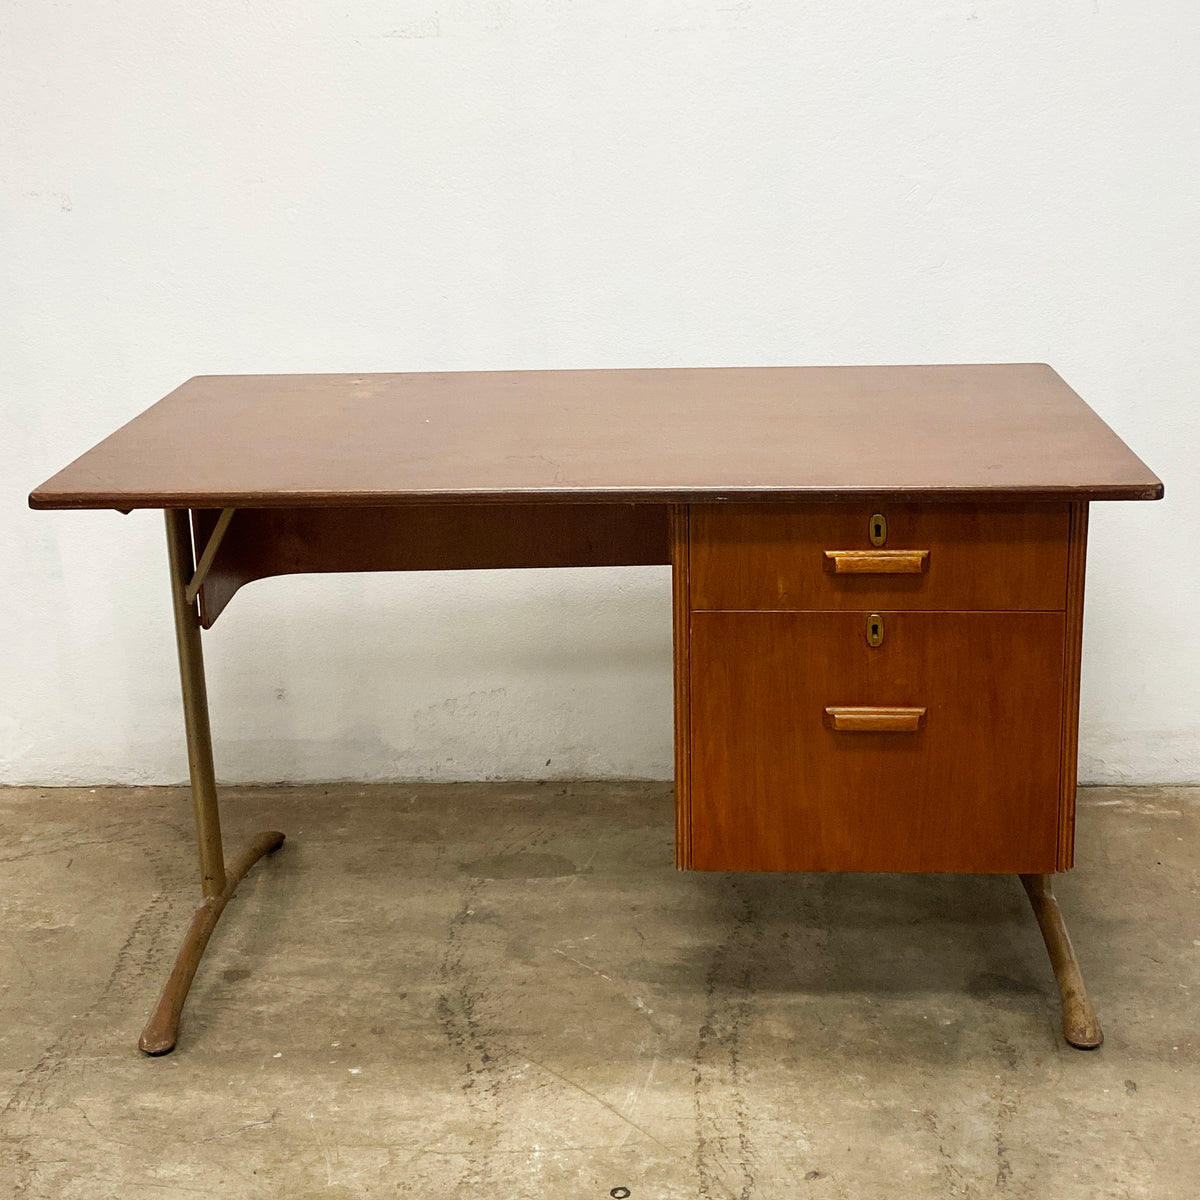 Industrial Retro 1960's 2 Drawer Metal and Wood Desk – The Design Ark